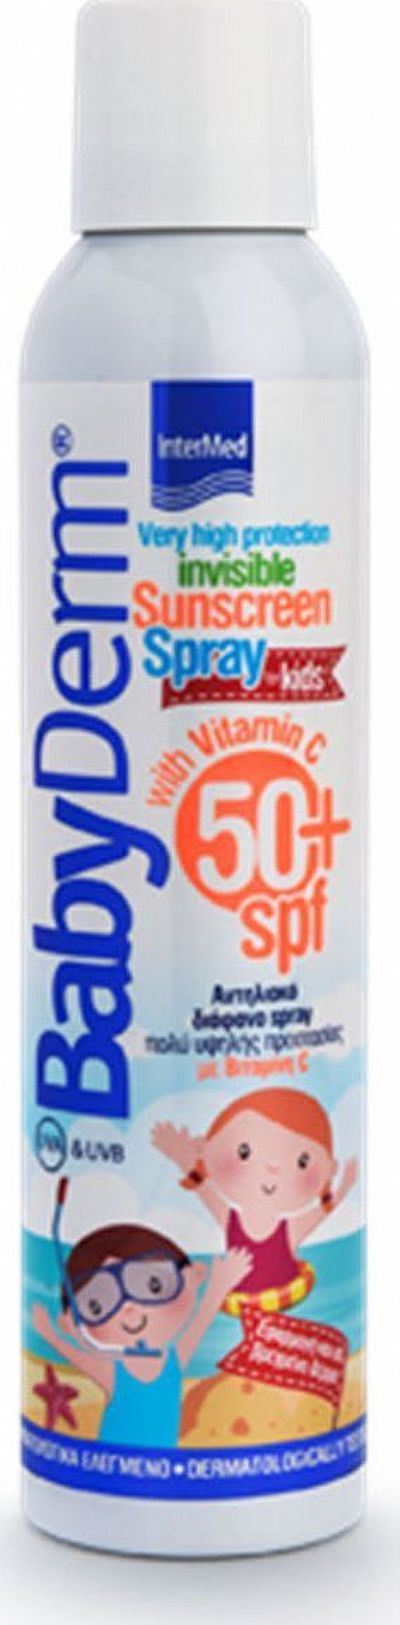 Intermed Babyderm Invisible Sunscreen Spray for Kids With Vitamin C SPF50 200ml